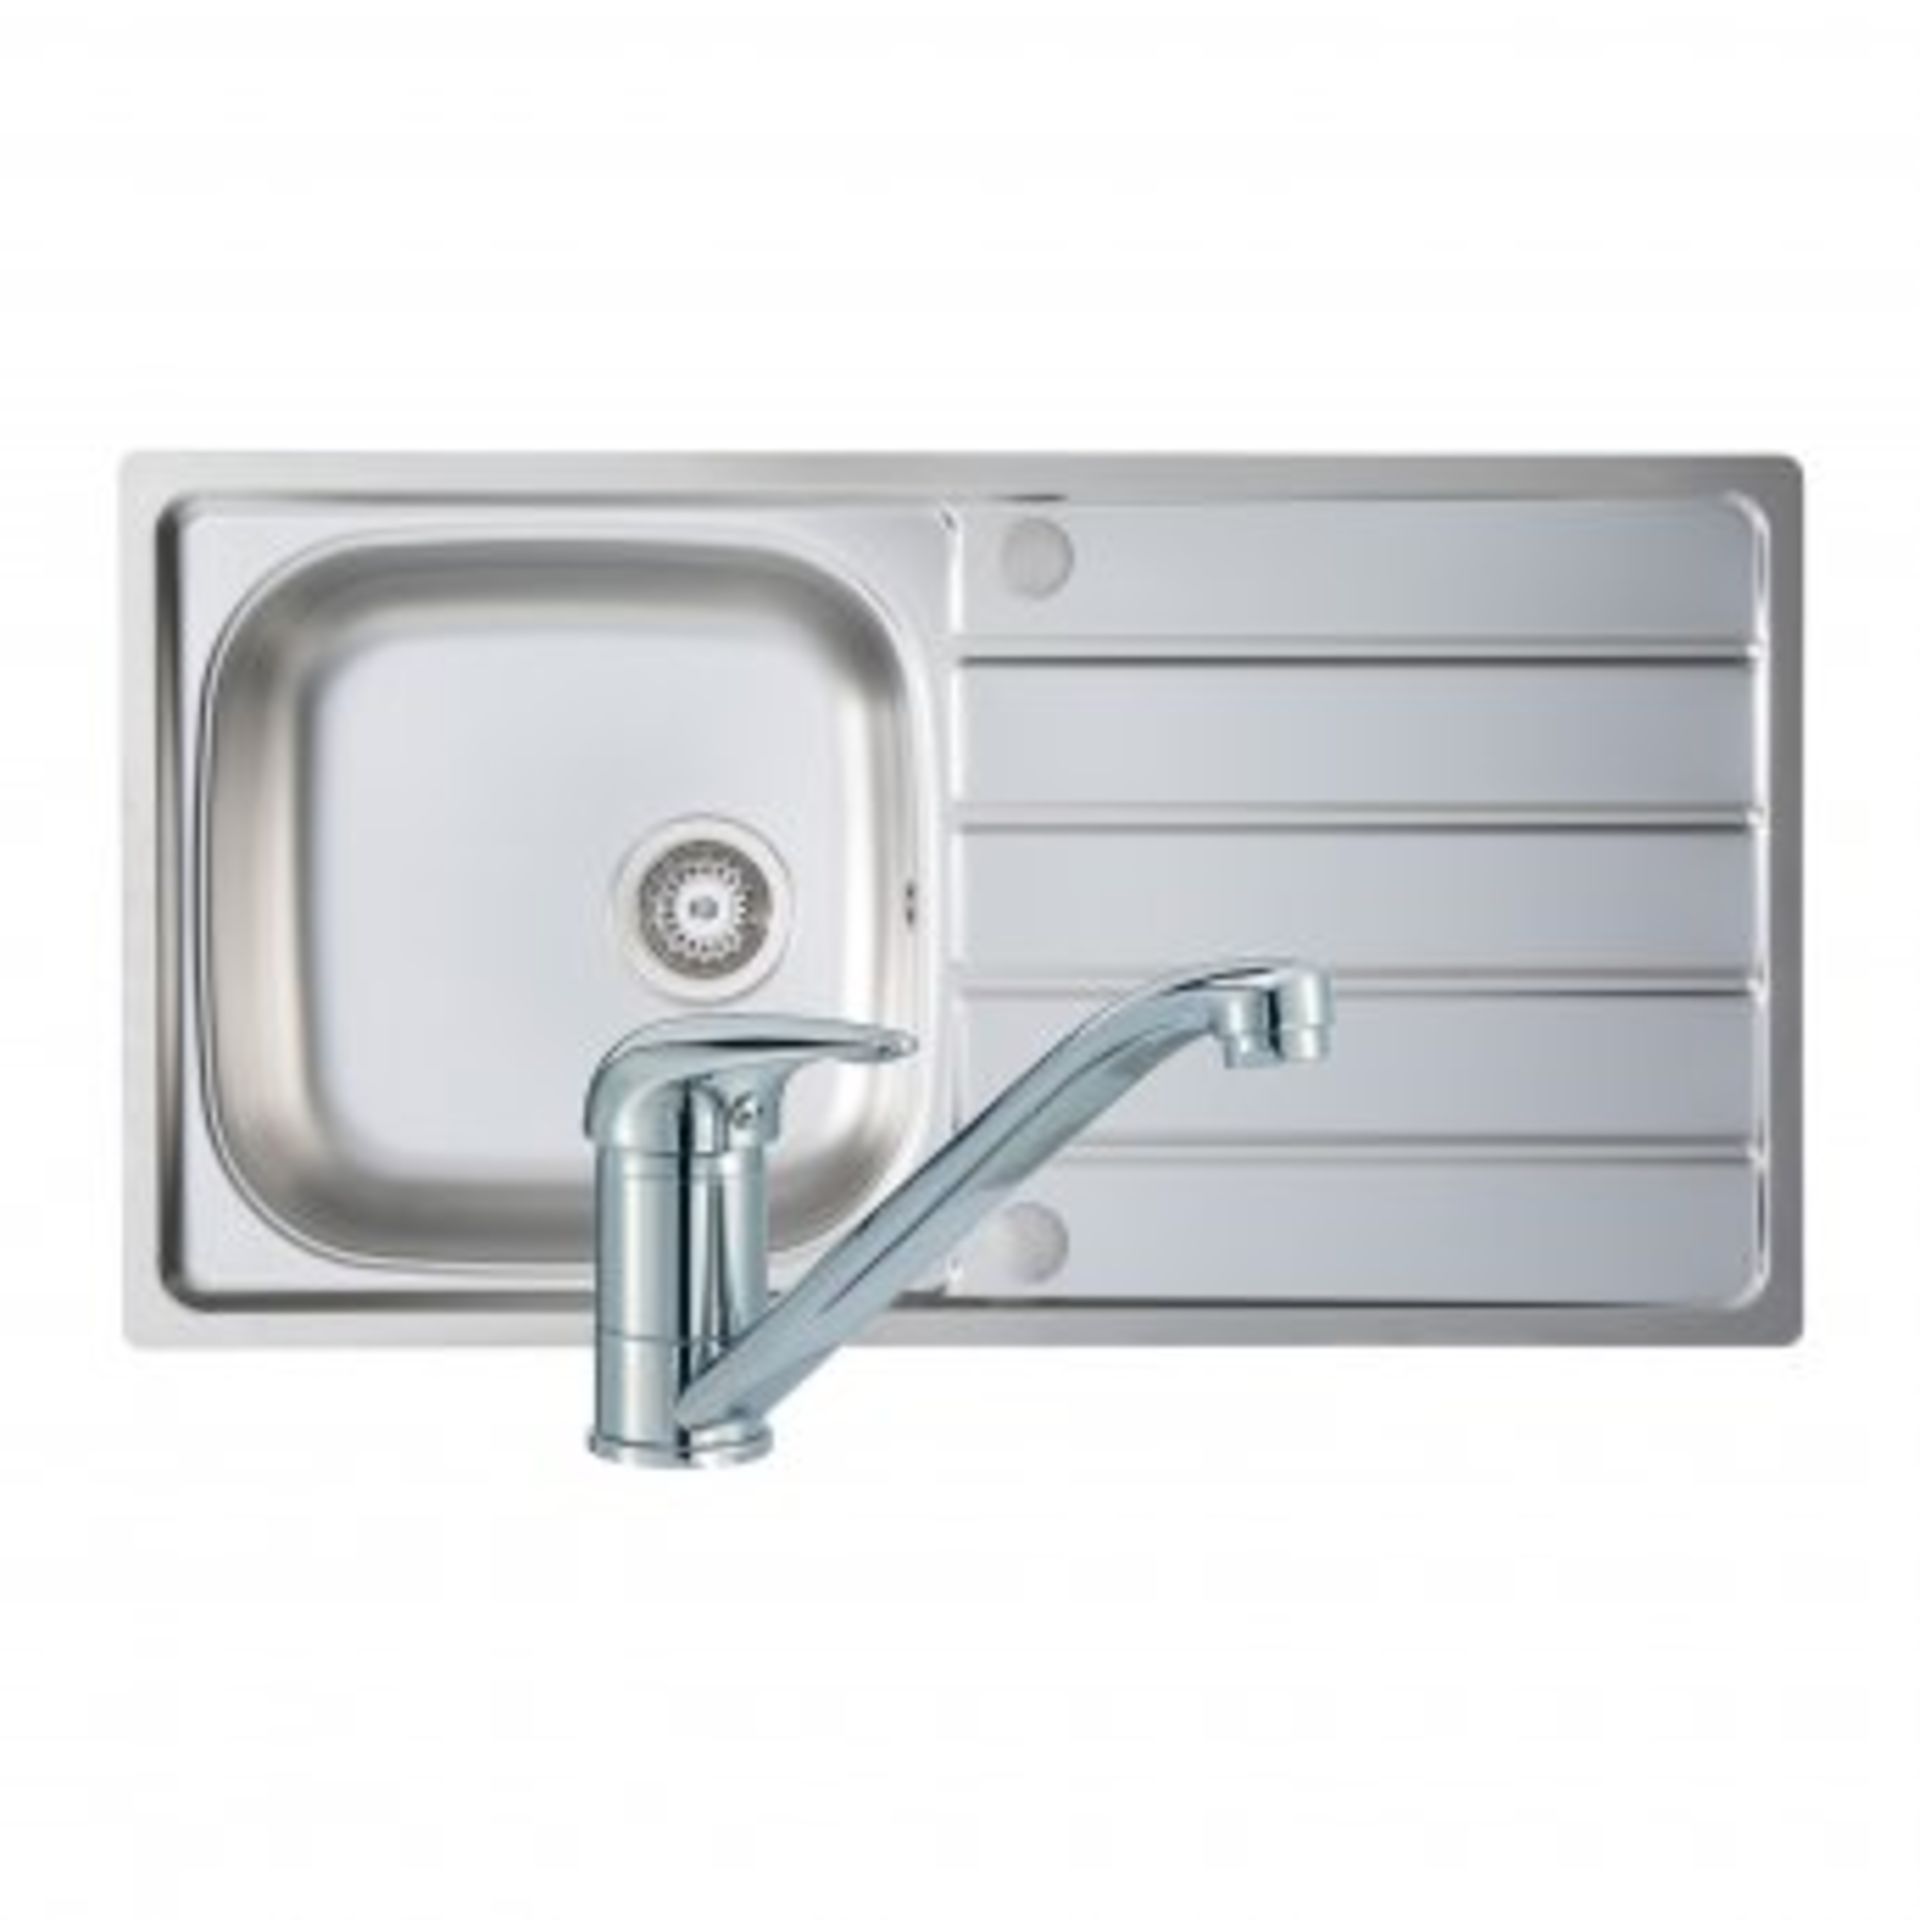 New (U218) Signature Prima 1.0 Bowl Kitchen Sink With Sink Tap And Waste Kit 965 L x 500 W - St...